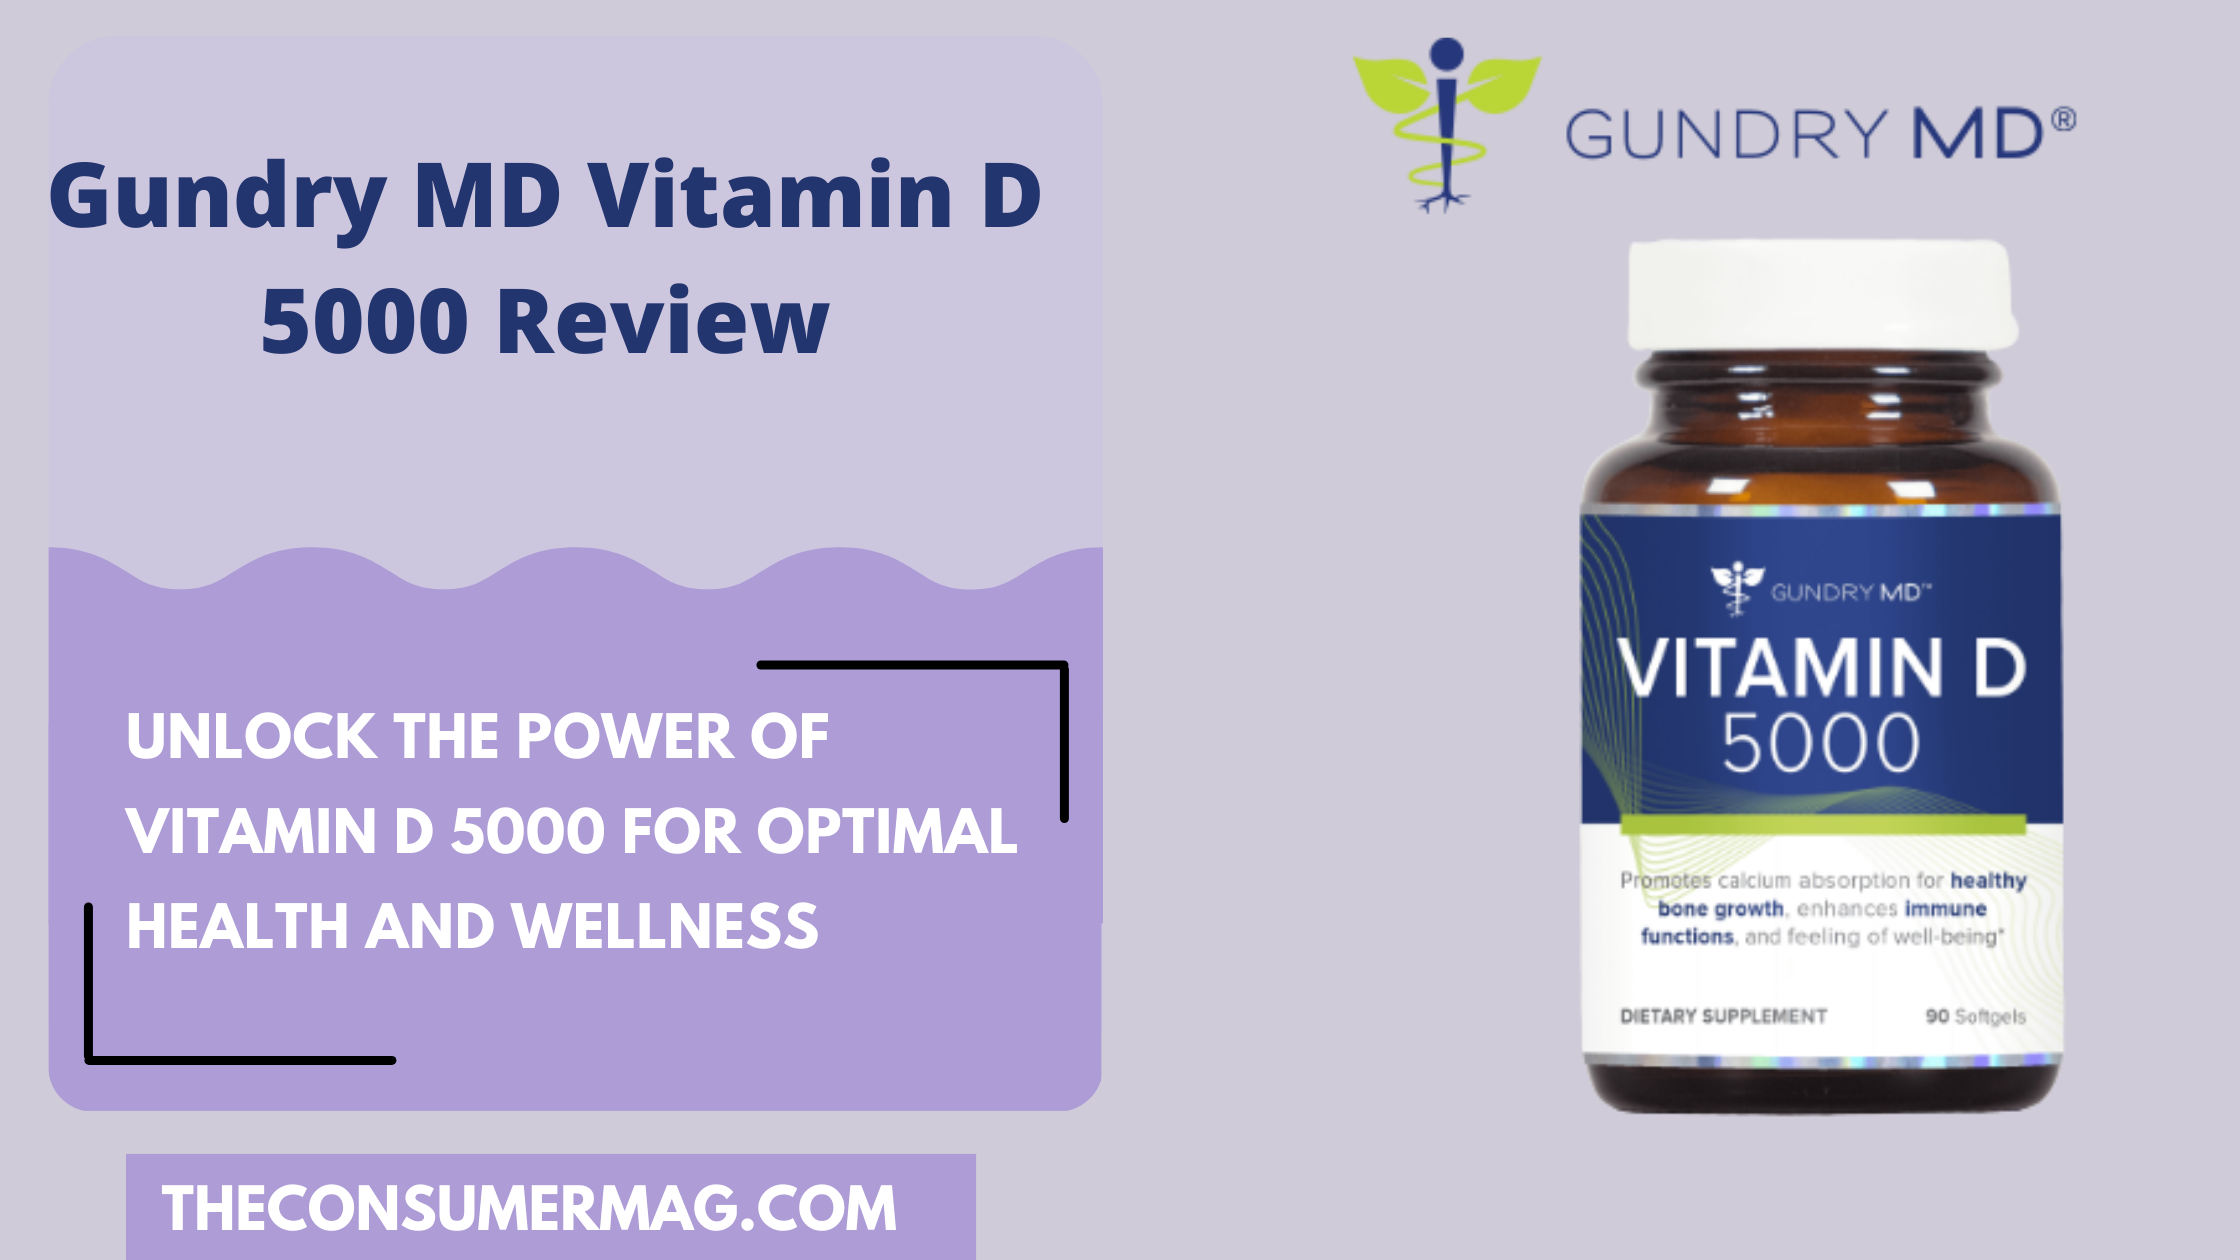 Vitamin D 5000 Featured Image